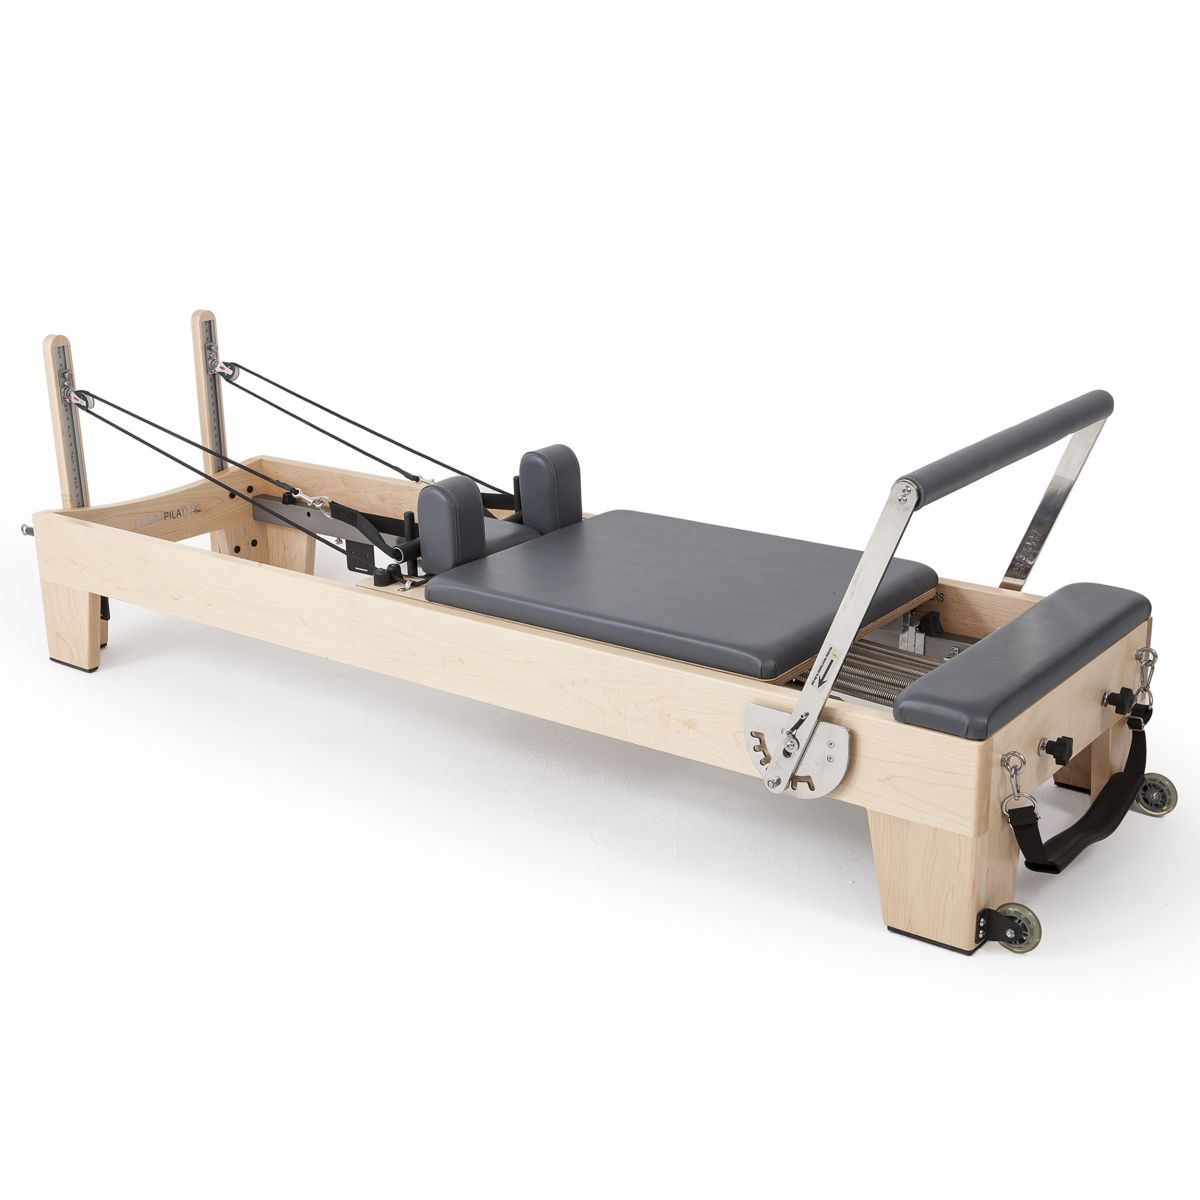 Pilates Reformer Buying Guide